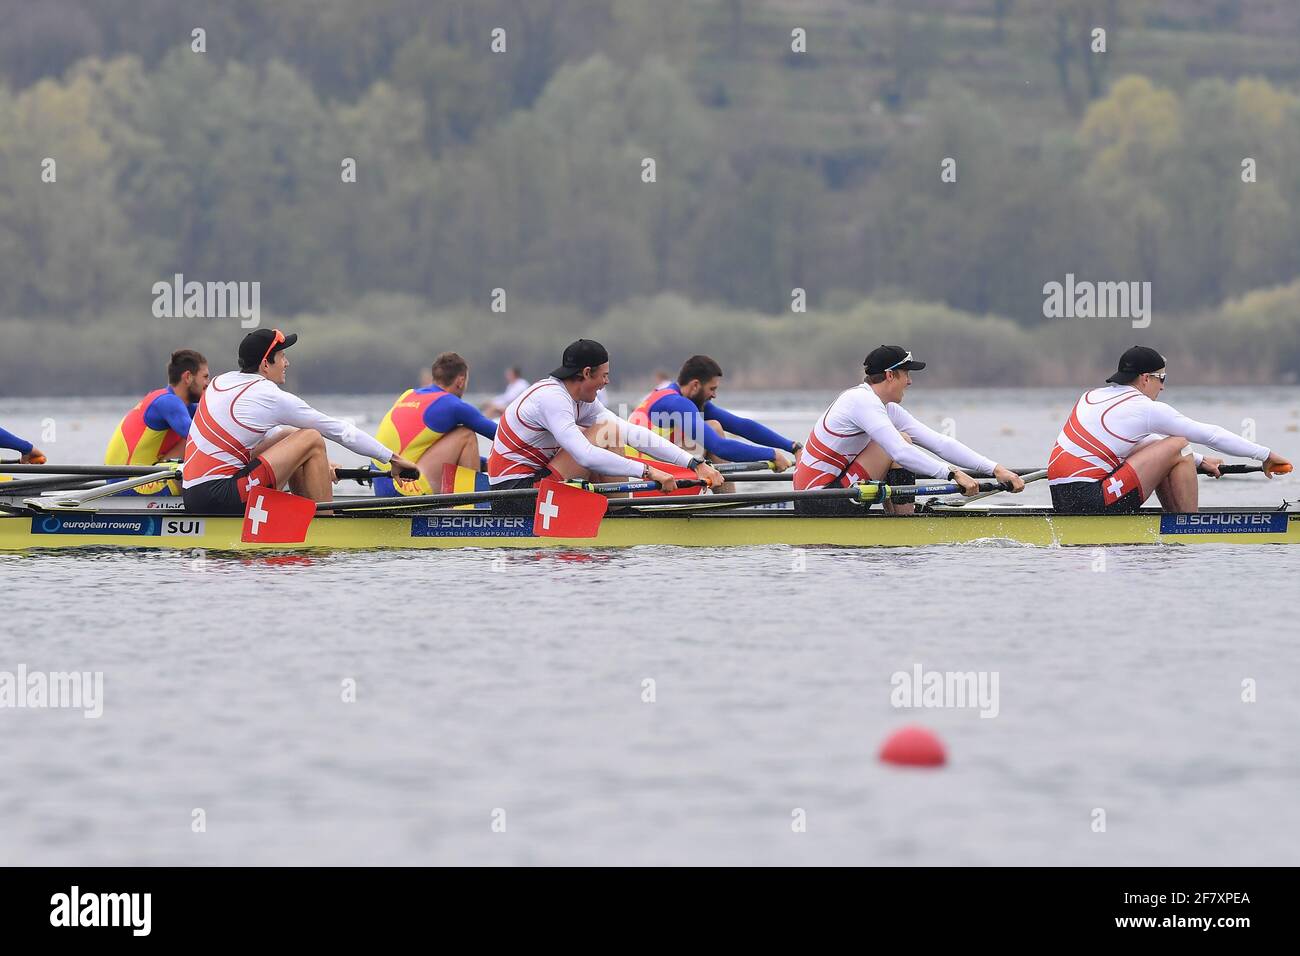 Varese, Italy. 10th Apr, 2021. Markus Kessler, Paul Jacquot, Joel Schuerch, Andrin Gulich (SUI), Men's Four during European Rowing Championships 2021, Canoying in Varese, Italy, April 10 2021 Credit: Independent Photo Agency/Alamy Live News Stock Photo